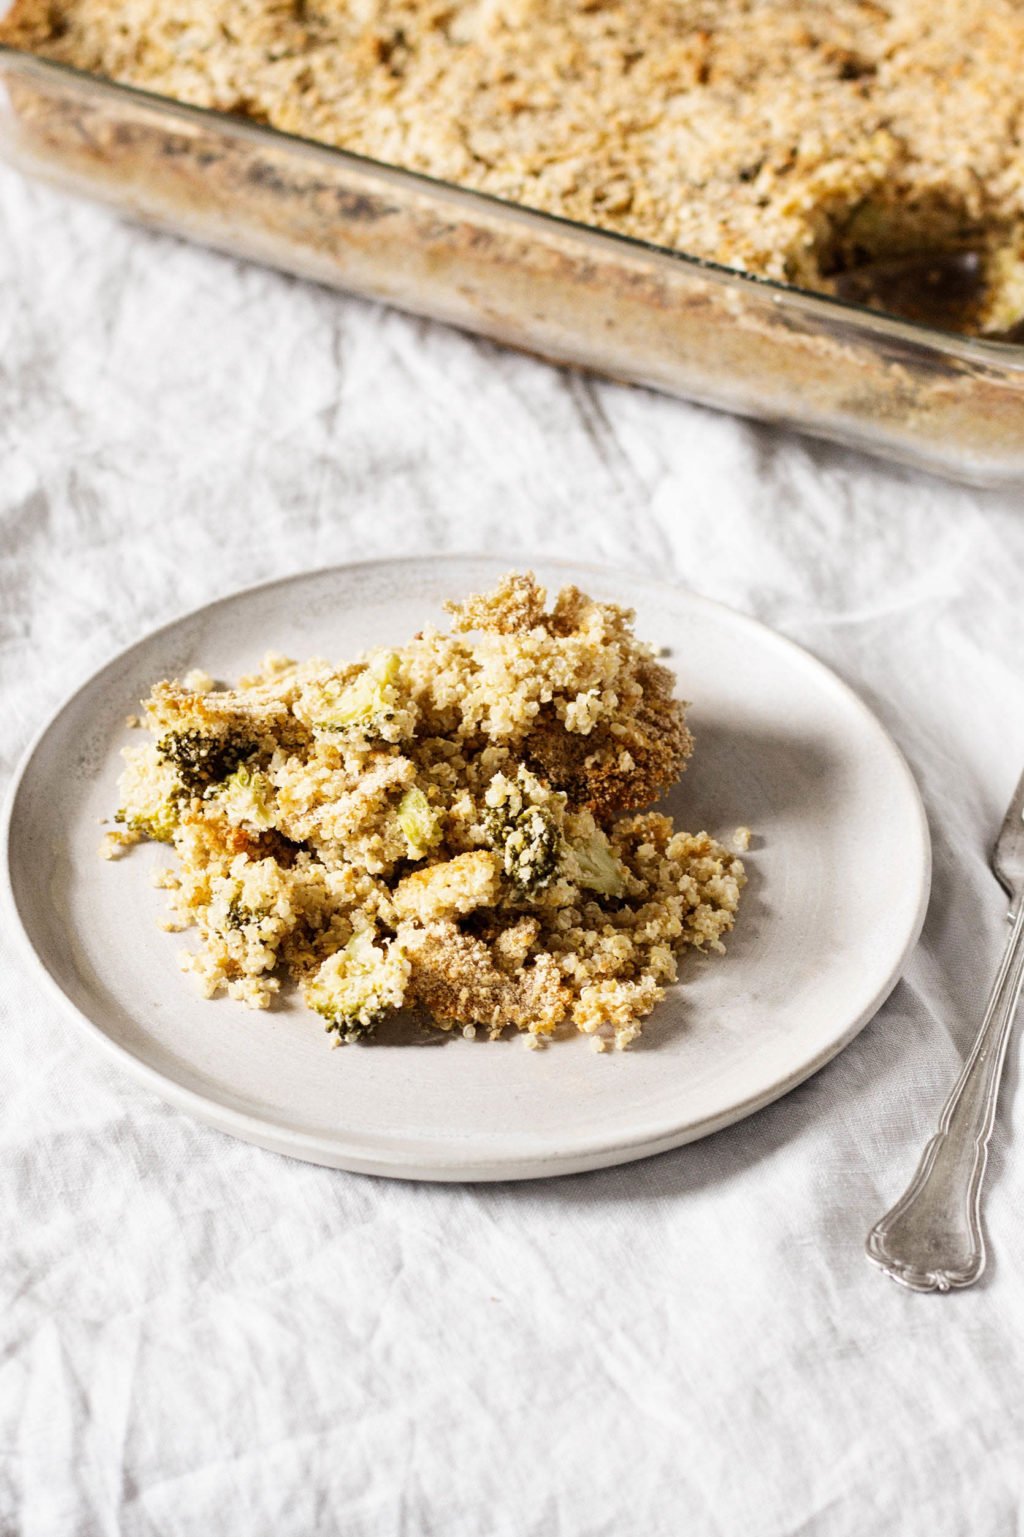 A quinoa and broccoli baked casserole has been portioned onto a white plate. It rests on a gray linen tablecloth.